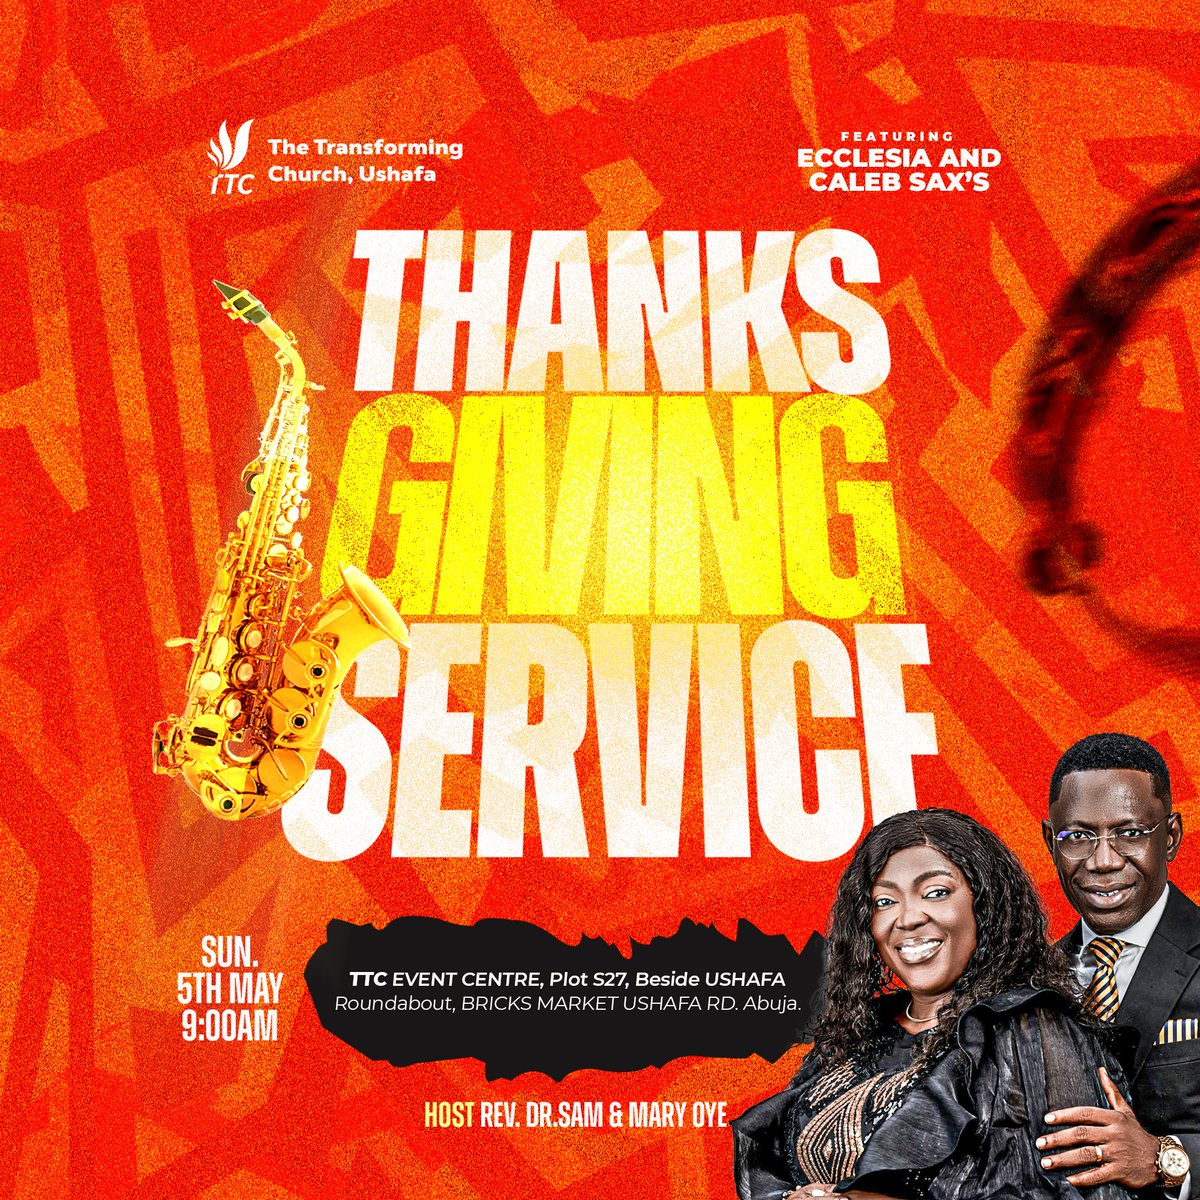 Tomorrow is our #thanksgivingsunday @CALEBSAX_22 @CALEBSAX1 will be ministering with The Ecclesia. We have reserved a seat for you #ttcinushafa #churchesinbwari #churchesinushafa #churchesindutse #pph #revsamoye